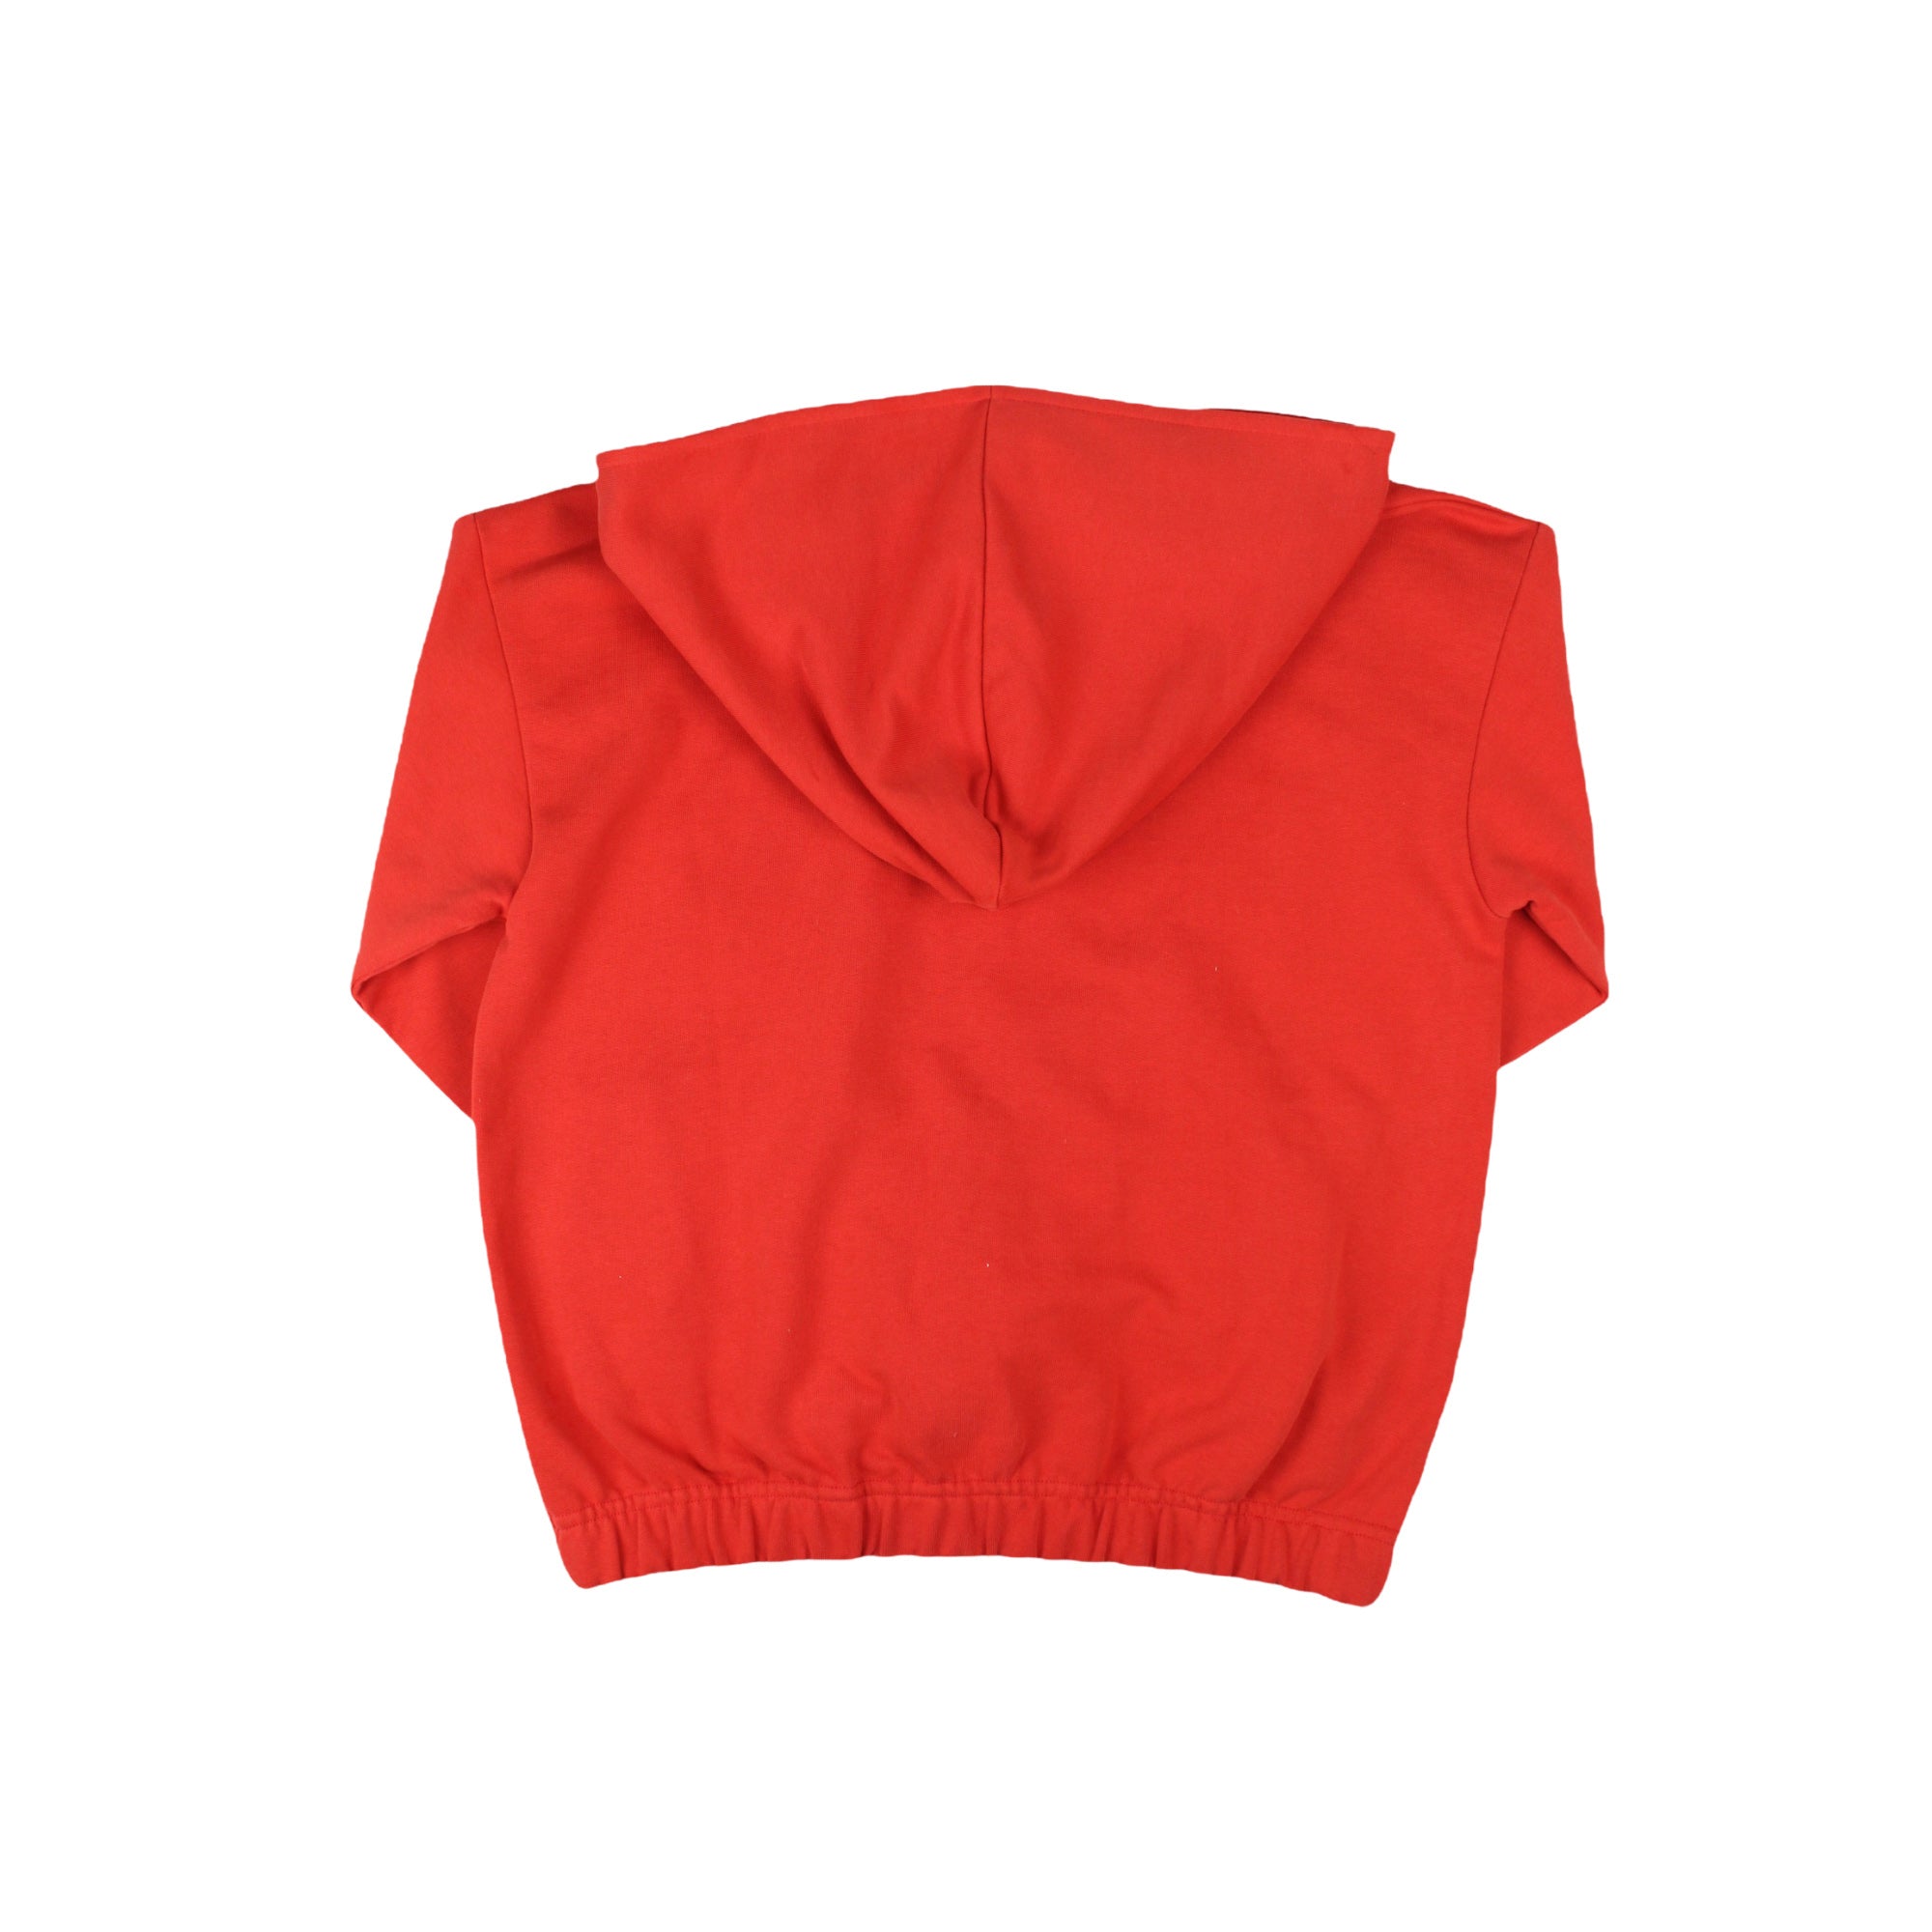 Boys & Girls Red Hooded Zip-Up Top